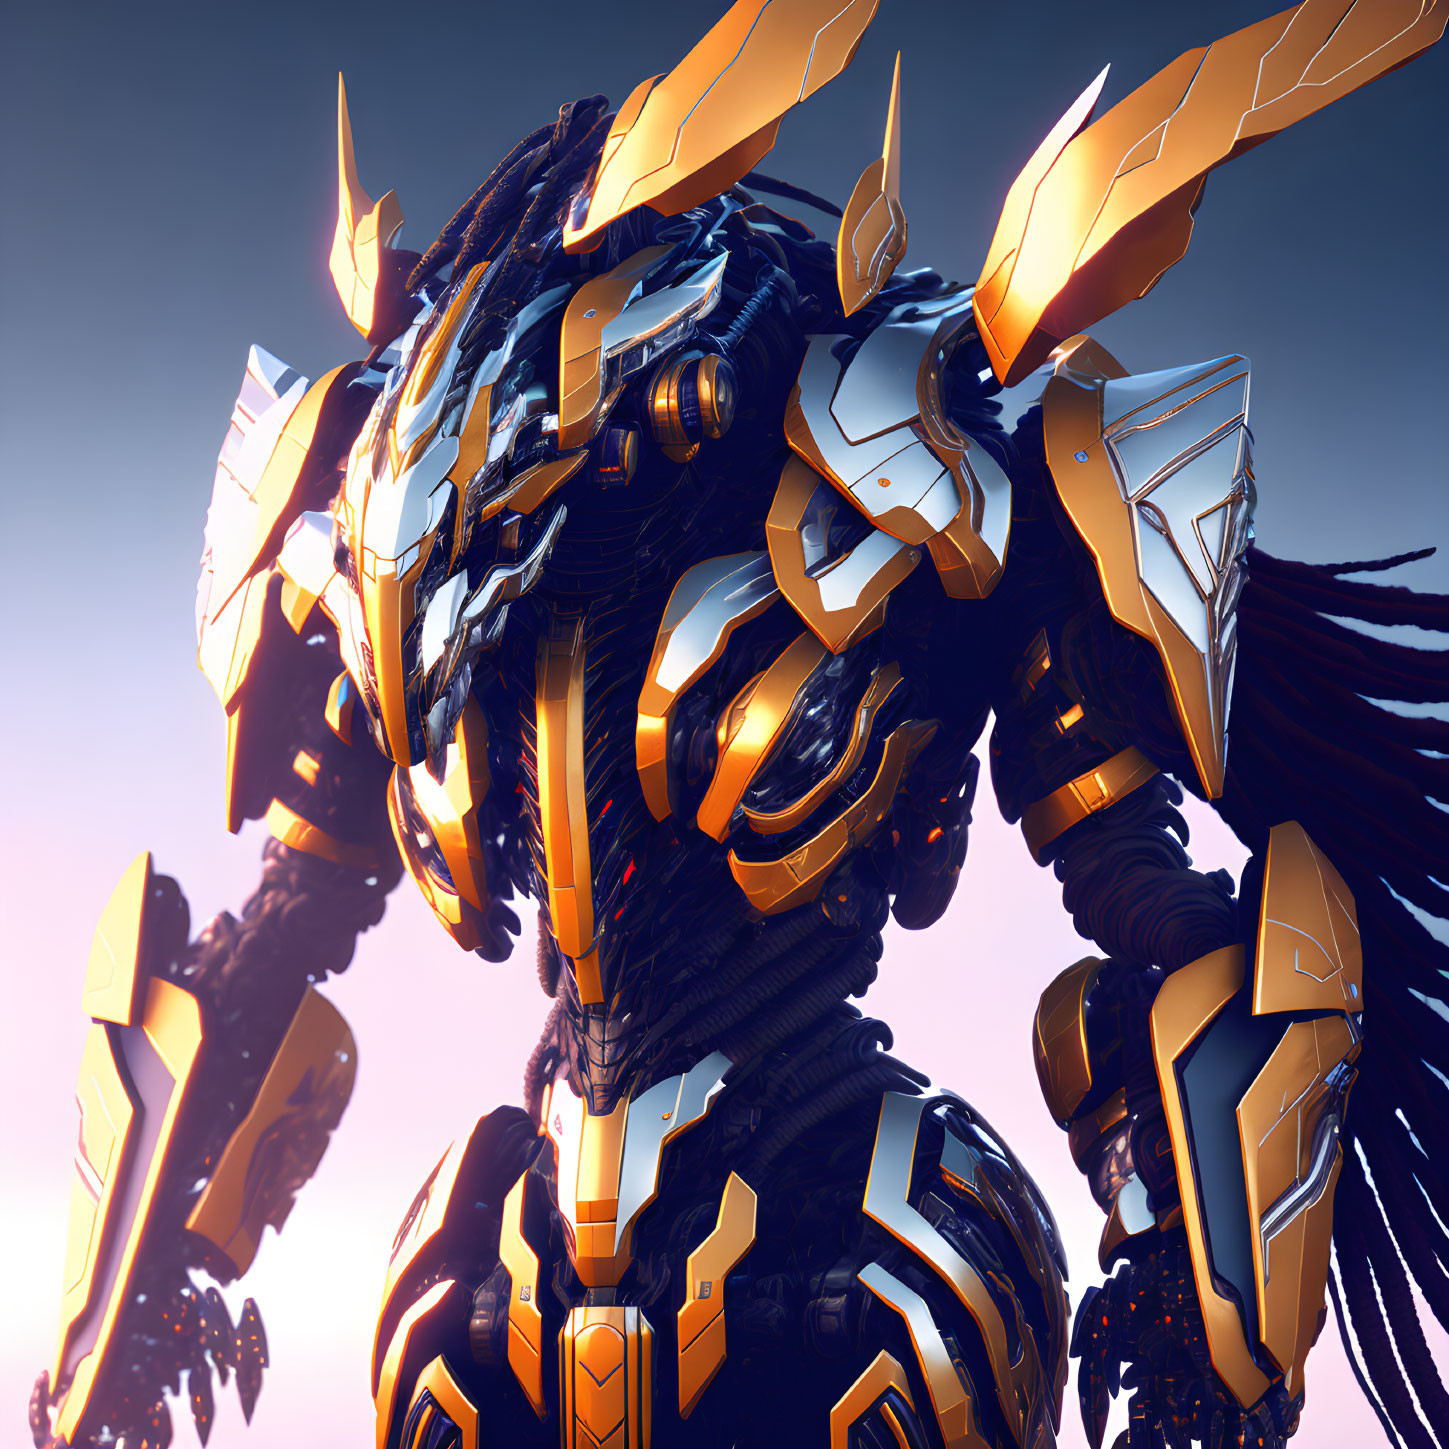 Armored robot with lion's mane in gold and blue on soft-focus backdrop